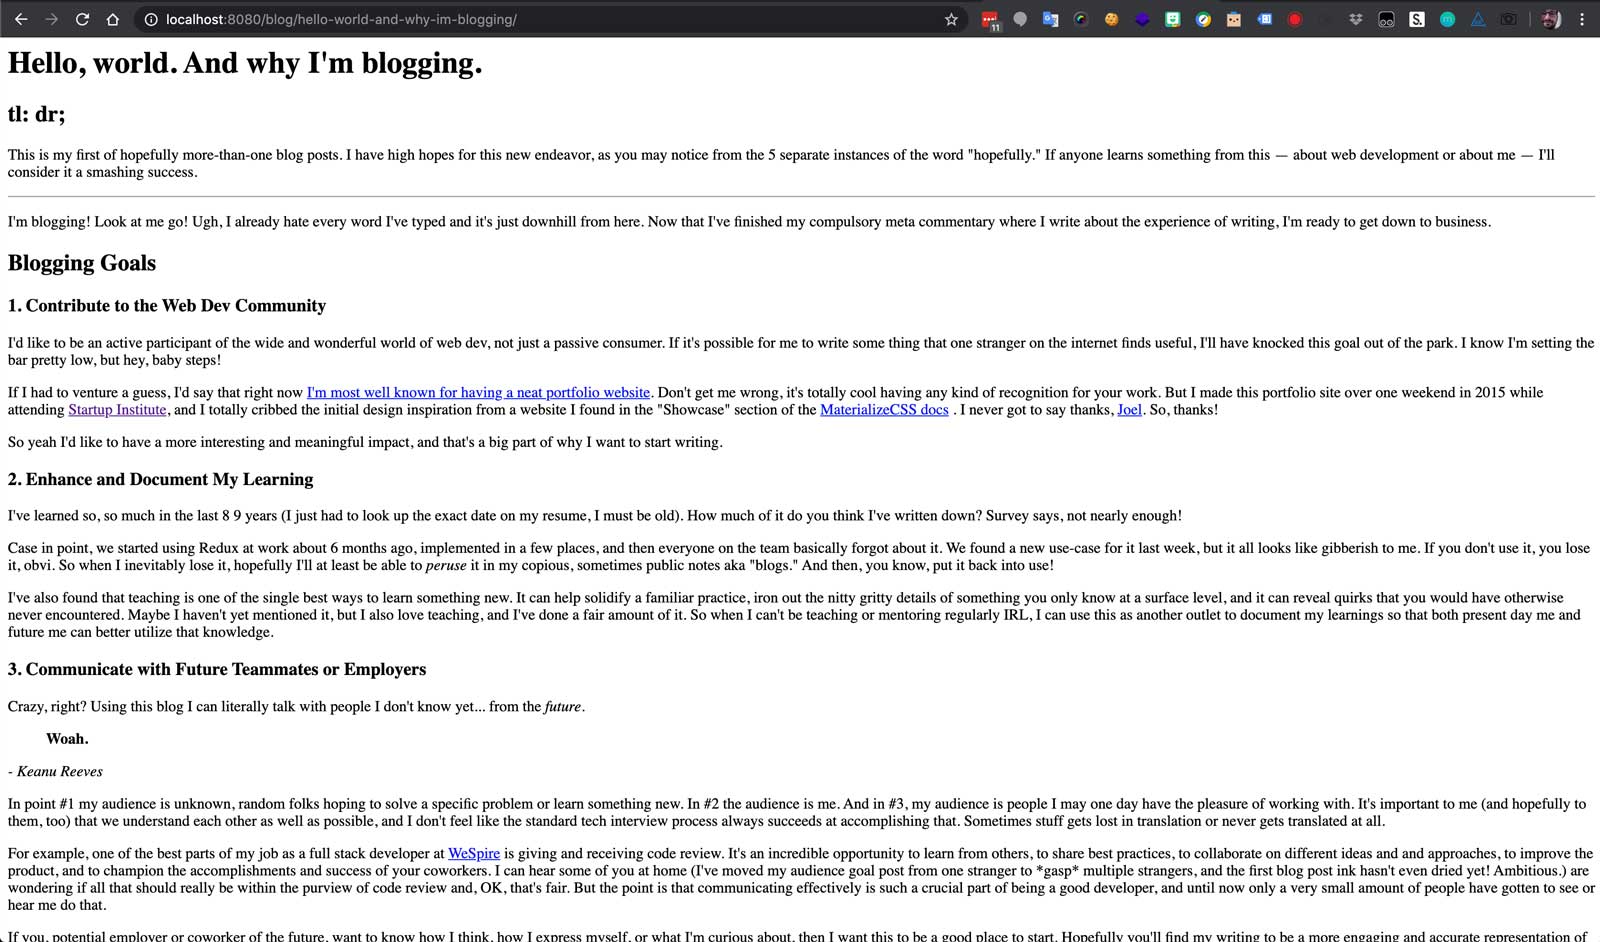 screenshot of this blog post hosted locally, with no CSS styling at all